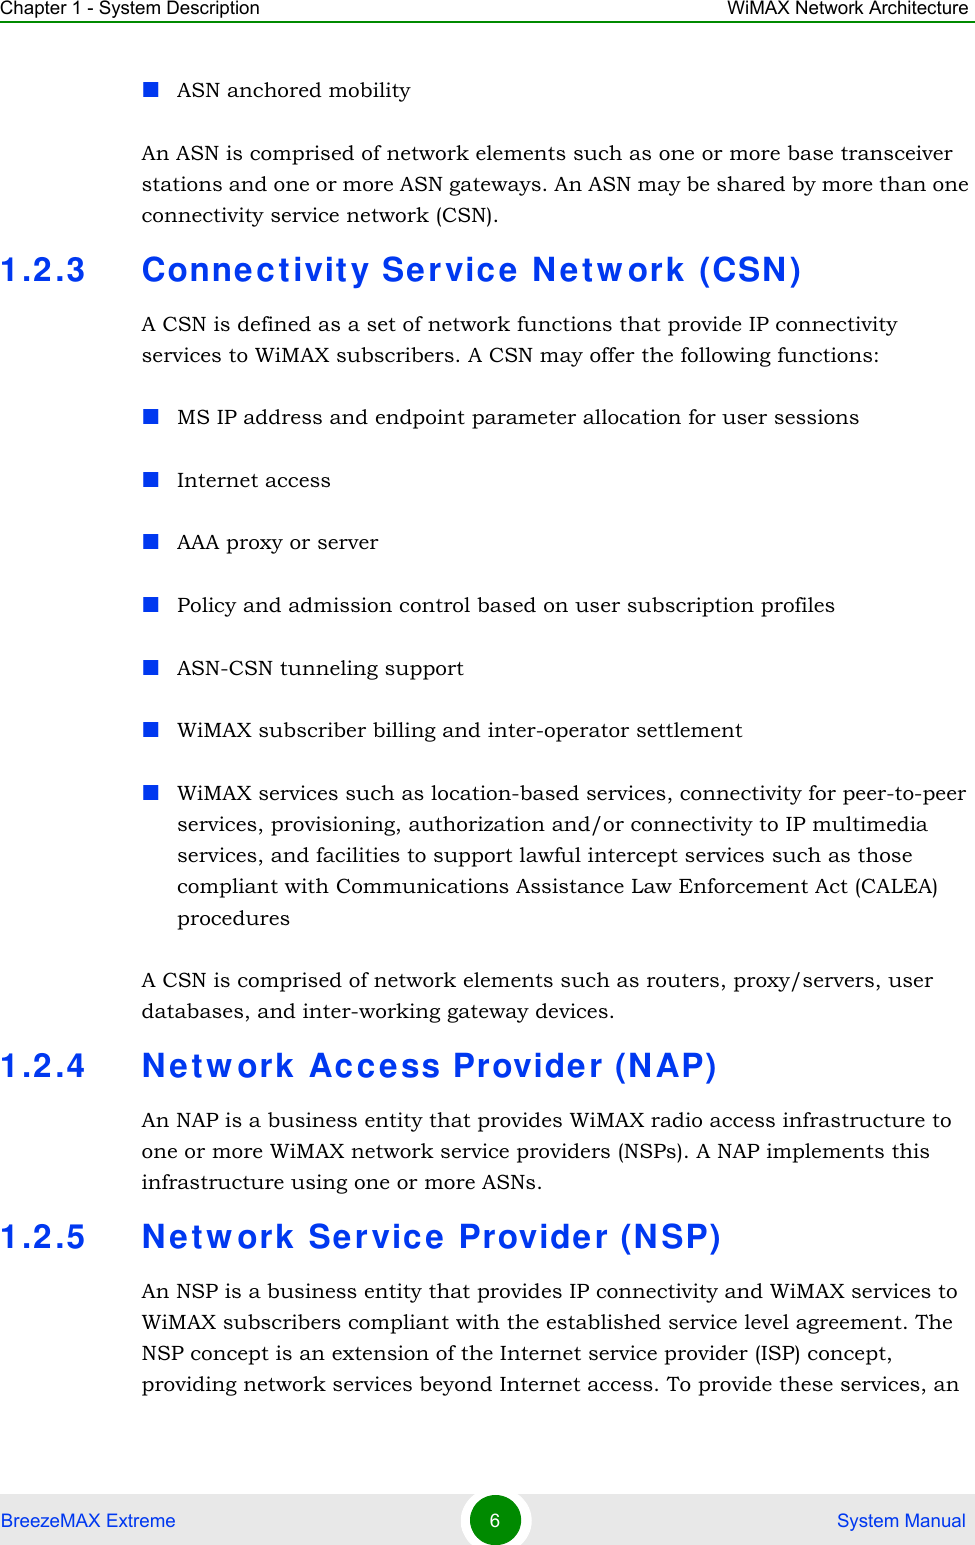 Chapter 1 - System Description WiMAX Network ArchitectureBreezeMAX Extreme 6 System ManualASN anchored mobilityAn ASN is comprised of network elements such as one or more base transceiver stations and one or more ASN gateways. An ASN may be shared by more than one connectivity service network (CSN).1.2.3 Connec tivity Ser vic e Netw ork (CSN )A CSN is defined as a set of network functions that provide IP connectivity services to WiMAX subscribers. A CSN may offer the following functions:MS IP address and endpoint parameter allocation for user sessionsInternet accessAAA proxy or serverPolicy and admission control based on user subscription profilesASN-CSN tunneling supportWiMAX subscriber billing and inter-operator settlementWiMAX services such as location-based services, connectivity for peer-to-peer services, provisioning, authorization and/or connectivity to IP multimedia services, and facilities to support lawful intercept services such as those compliant with Communications Assistance Law Enforcement Act (CALEA) proceduresA CSN is comprised of network elements such as routers, proxy/servers, user databases, and inter-working gateway devices.1.2.4 Ne tw ork Acce ss Provider (NAP)An NAP is a business entity that provides WiMAX radio access infrastructure to one or more WiMAX network service providers (NSPs). A NAP implements this infrastructure using one or more ASNs.1.2.5 Ne tw ork Service Provider (N SP)An NSP is a business entity that provides IP connectivity and WiMAX services to WiMAX subscribers compliant with the established service level agreement. The NSP concept is an extension of the Internet service provider (ISP) concept, providing network services beyond Internet access. To provide these services, an 